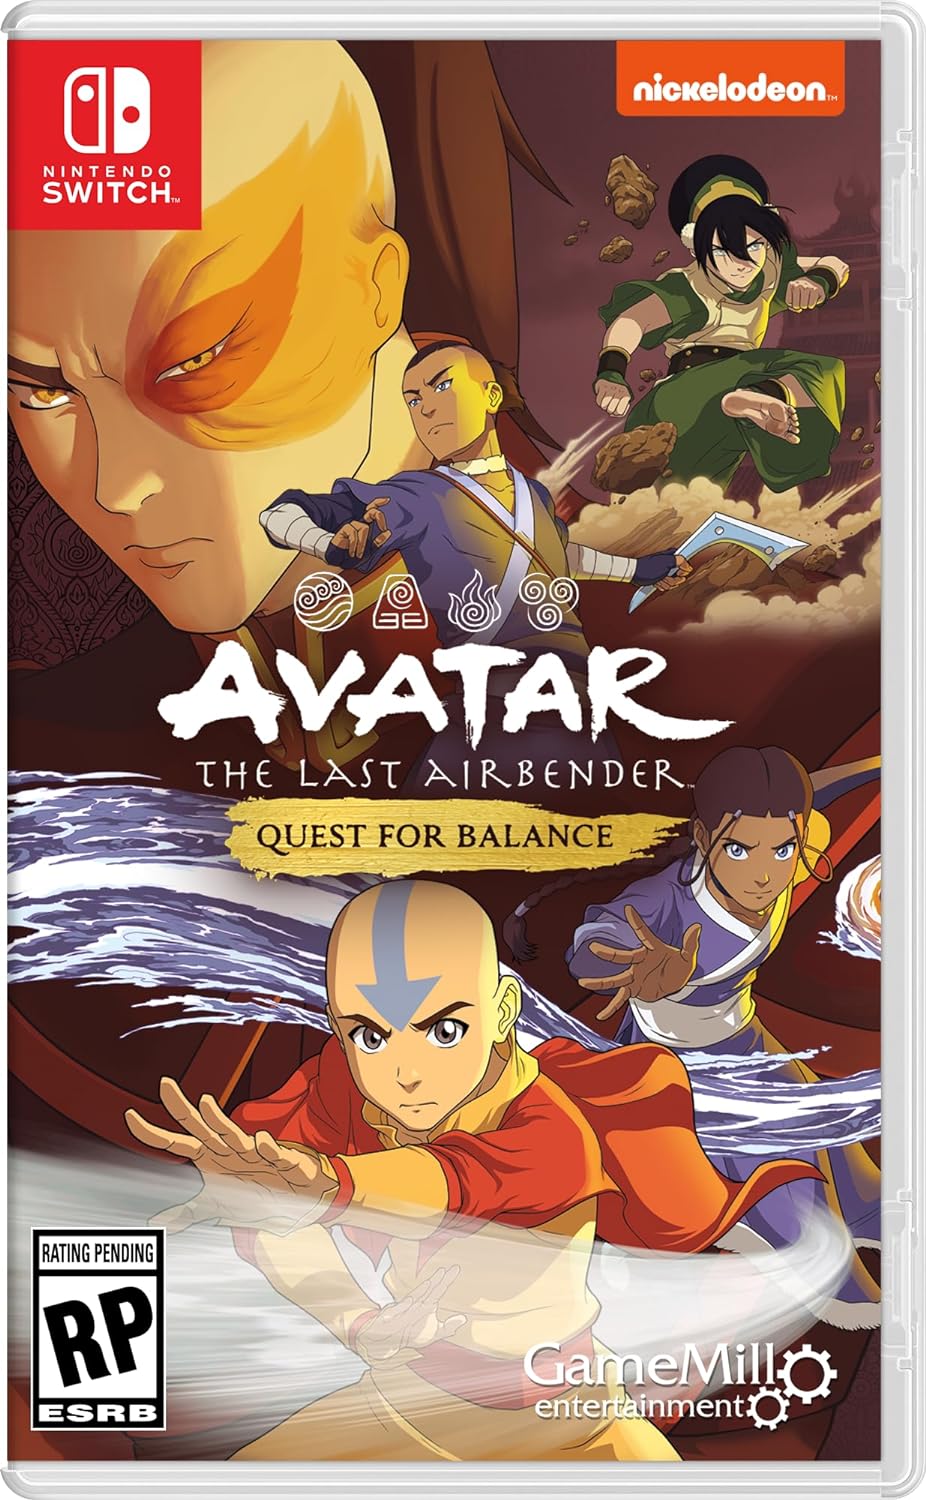 Avatar The Last Airbender: The Quest for Balance (Nintendo Switch, Playstation 5, or Xbox Series X, Physical) $30 + Free Shipping w/ Prime or on Orders $35+